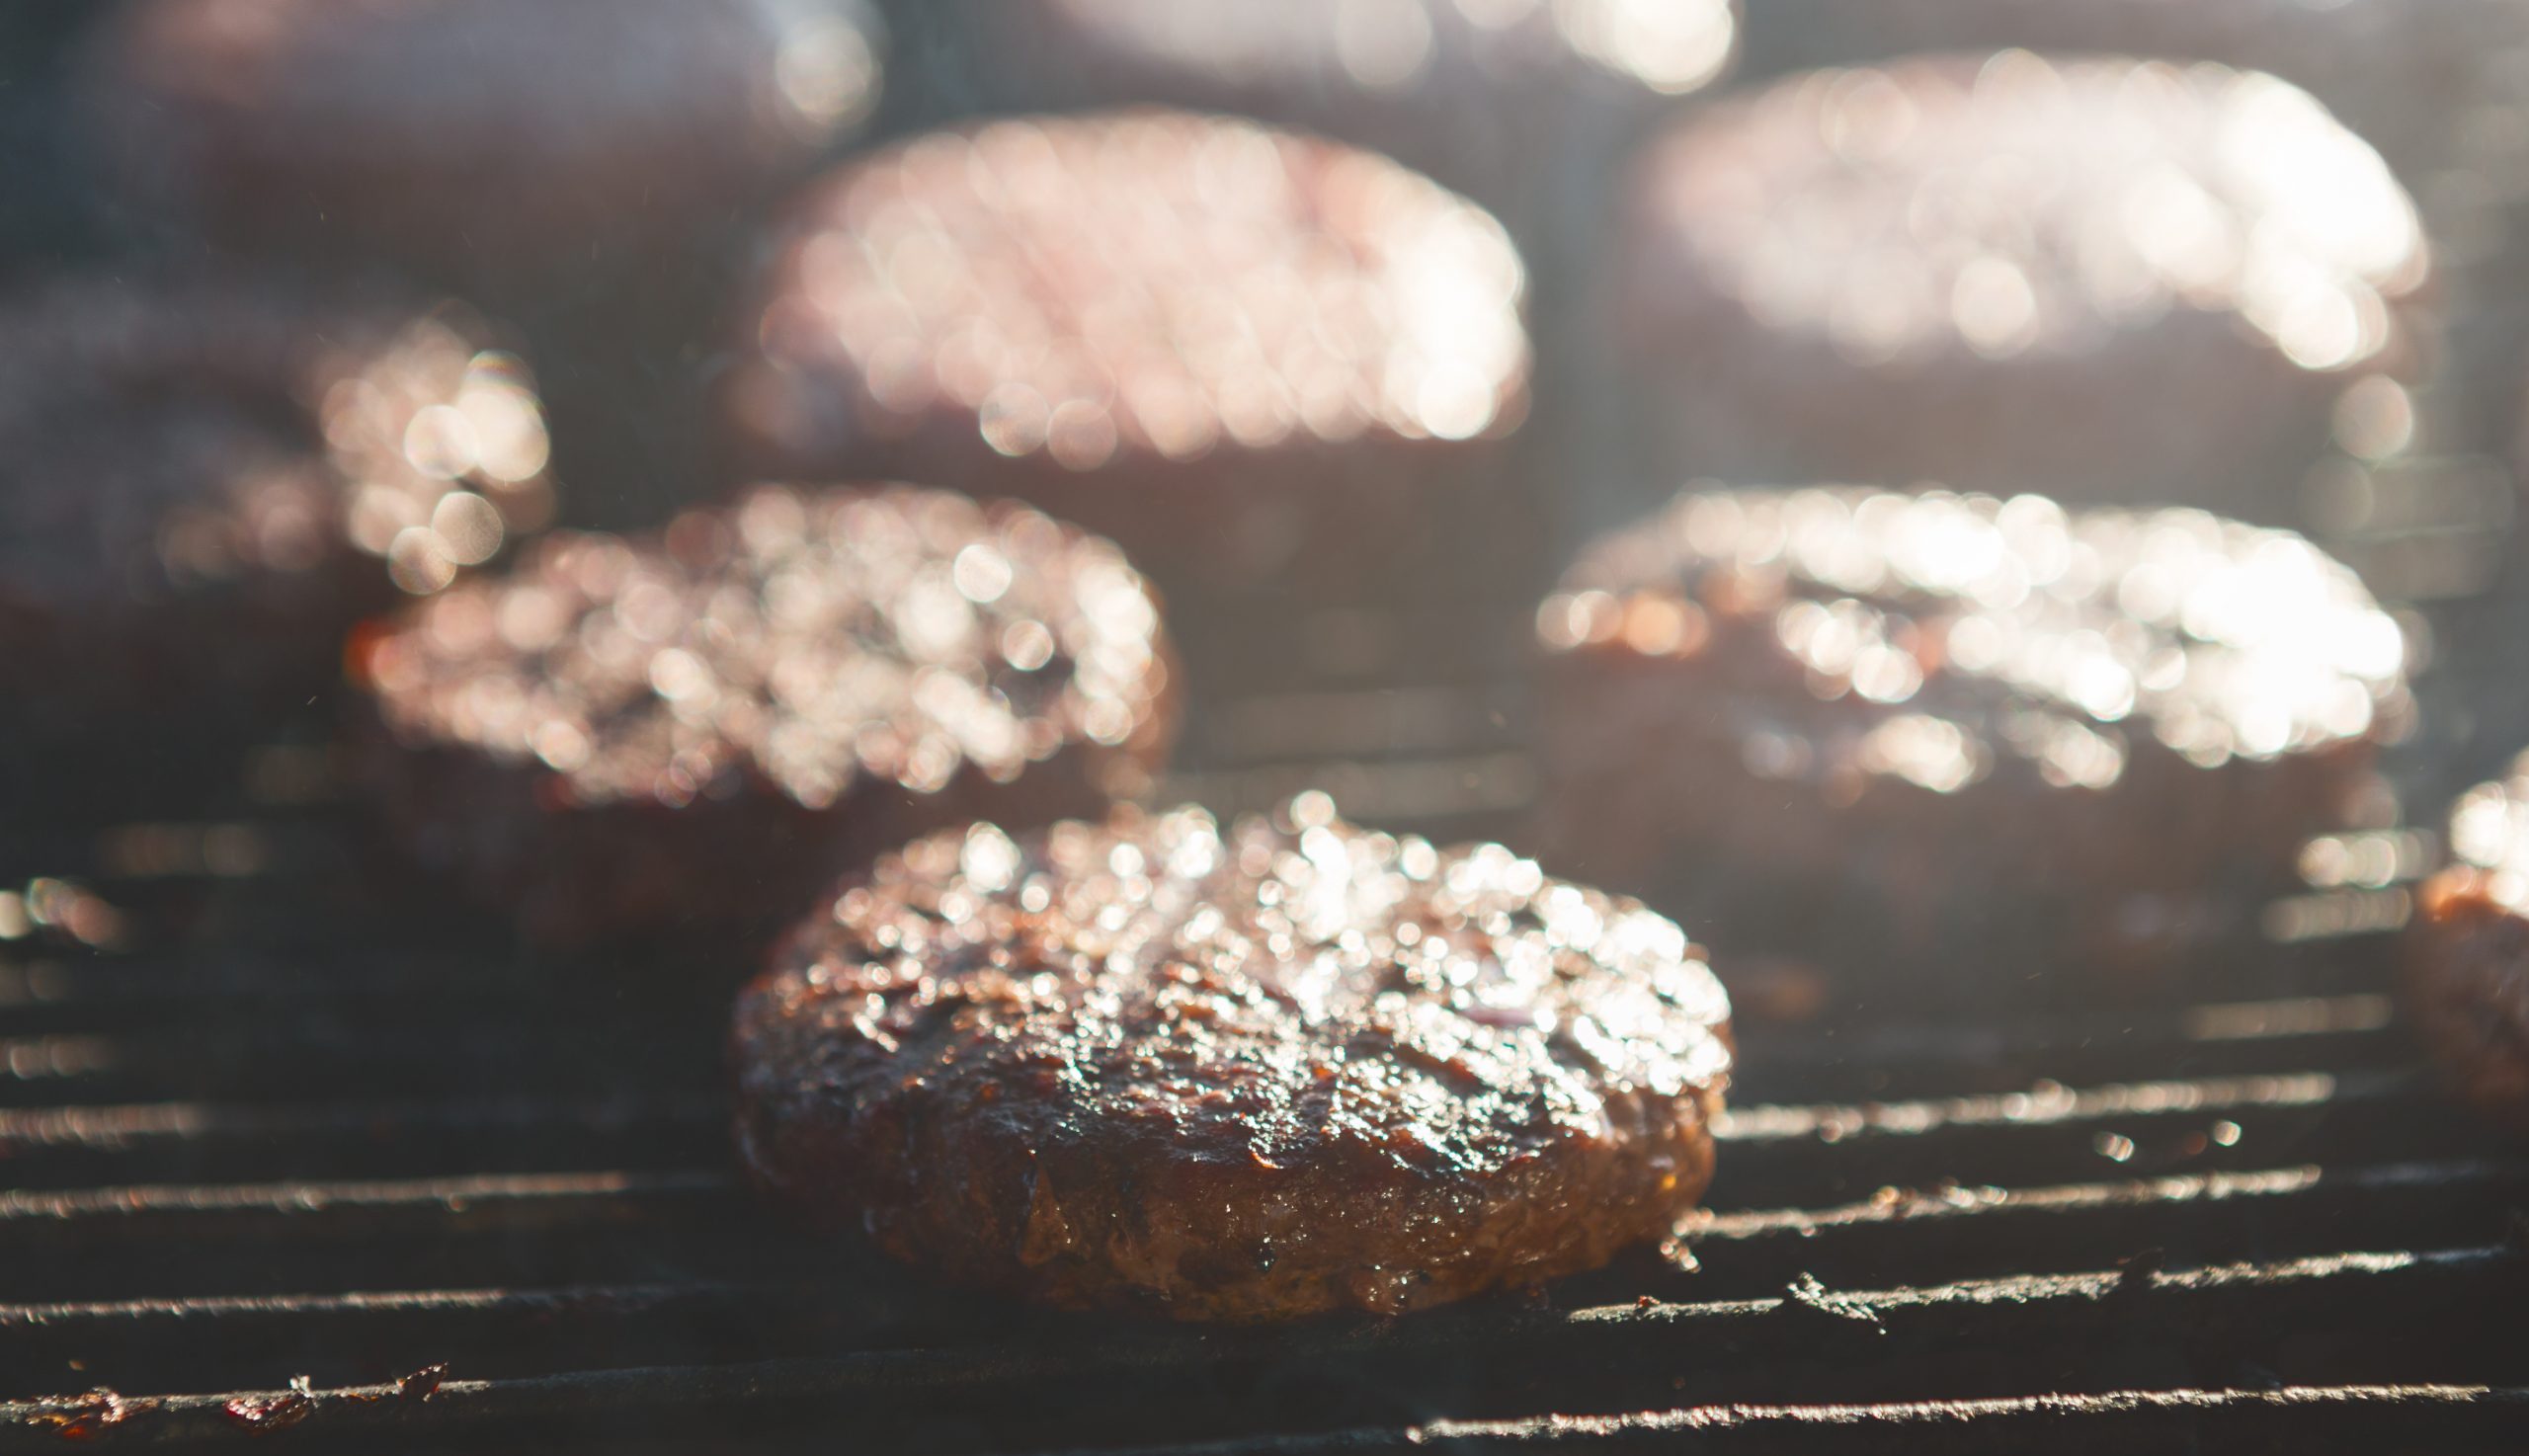 Bring Your A-Game With this Tailgating Recipe for the Grill